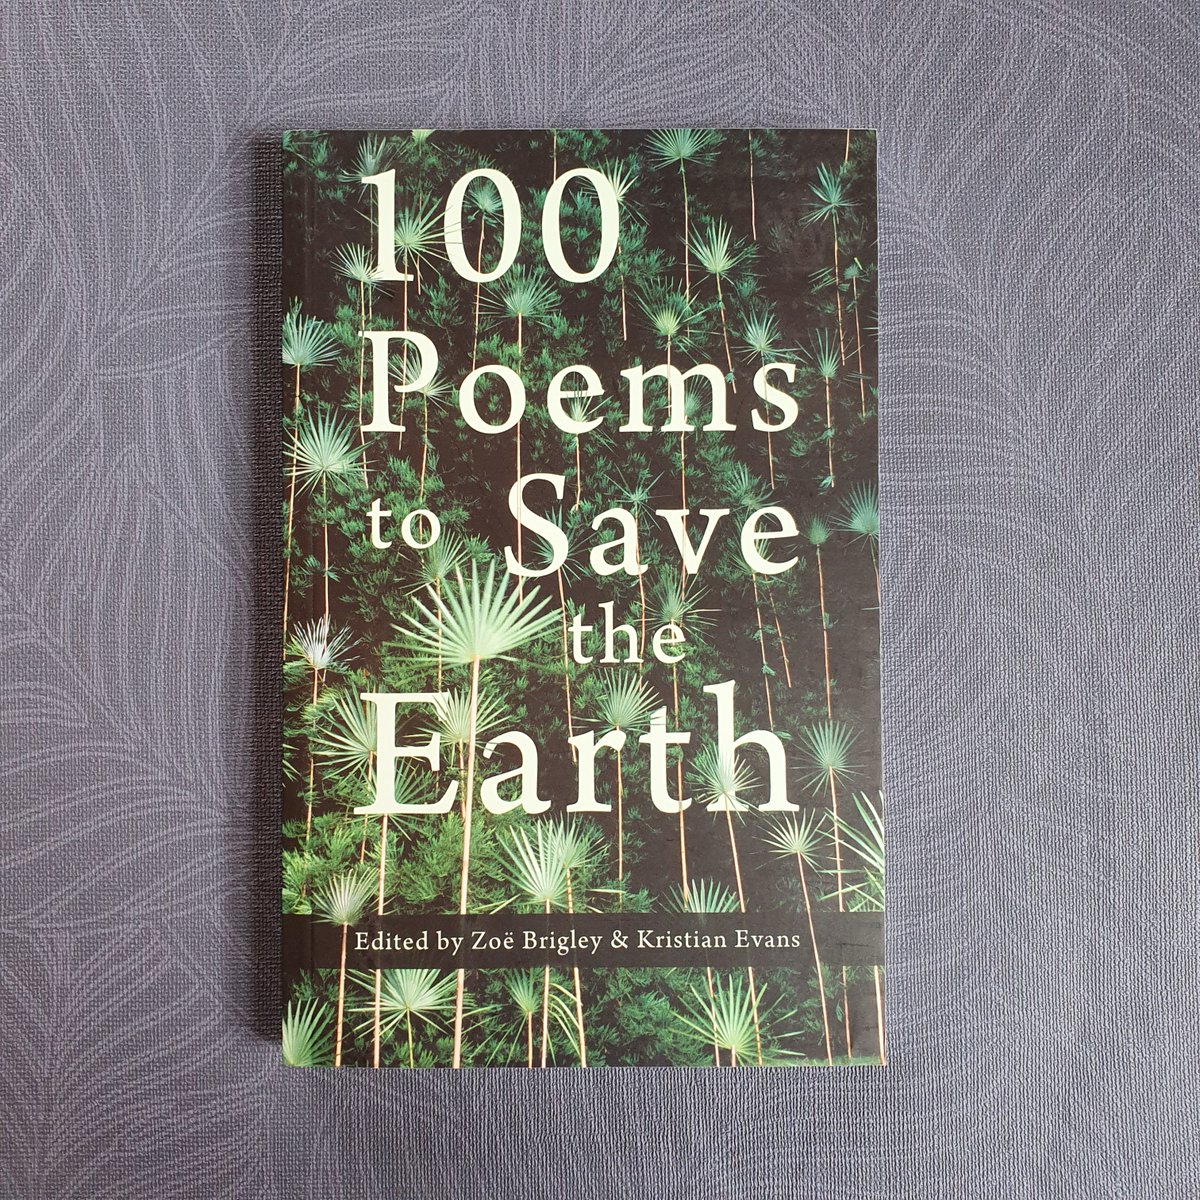 This #EarthDay, pick up a copy of ‘100 Poems to Save the Earth’ which is full of nourishing poems that remind us of the beauty of our fragile world. Available in bookshops & online serenbooks.com/book/100-poems…. Edited by @ZoeBrigley & @kenfigdunes.